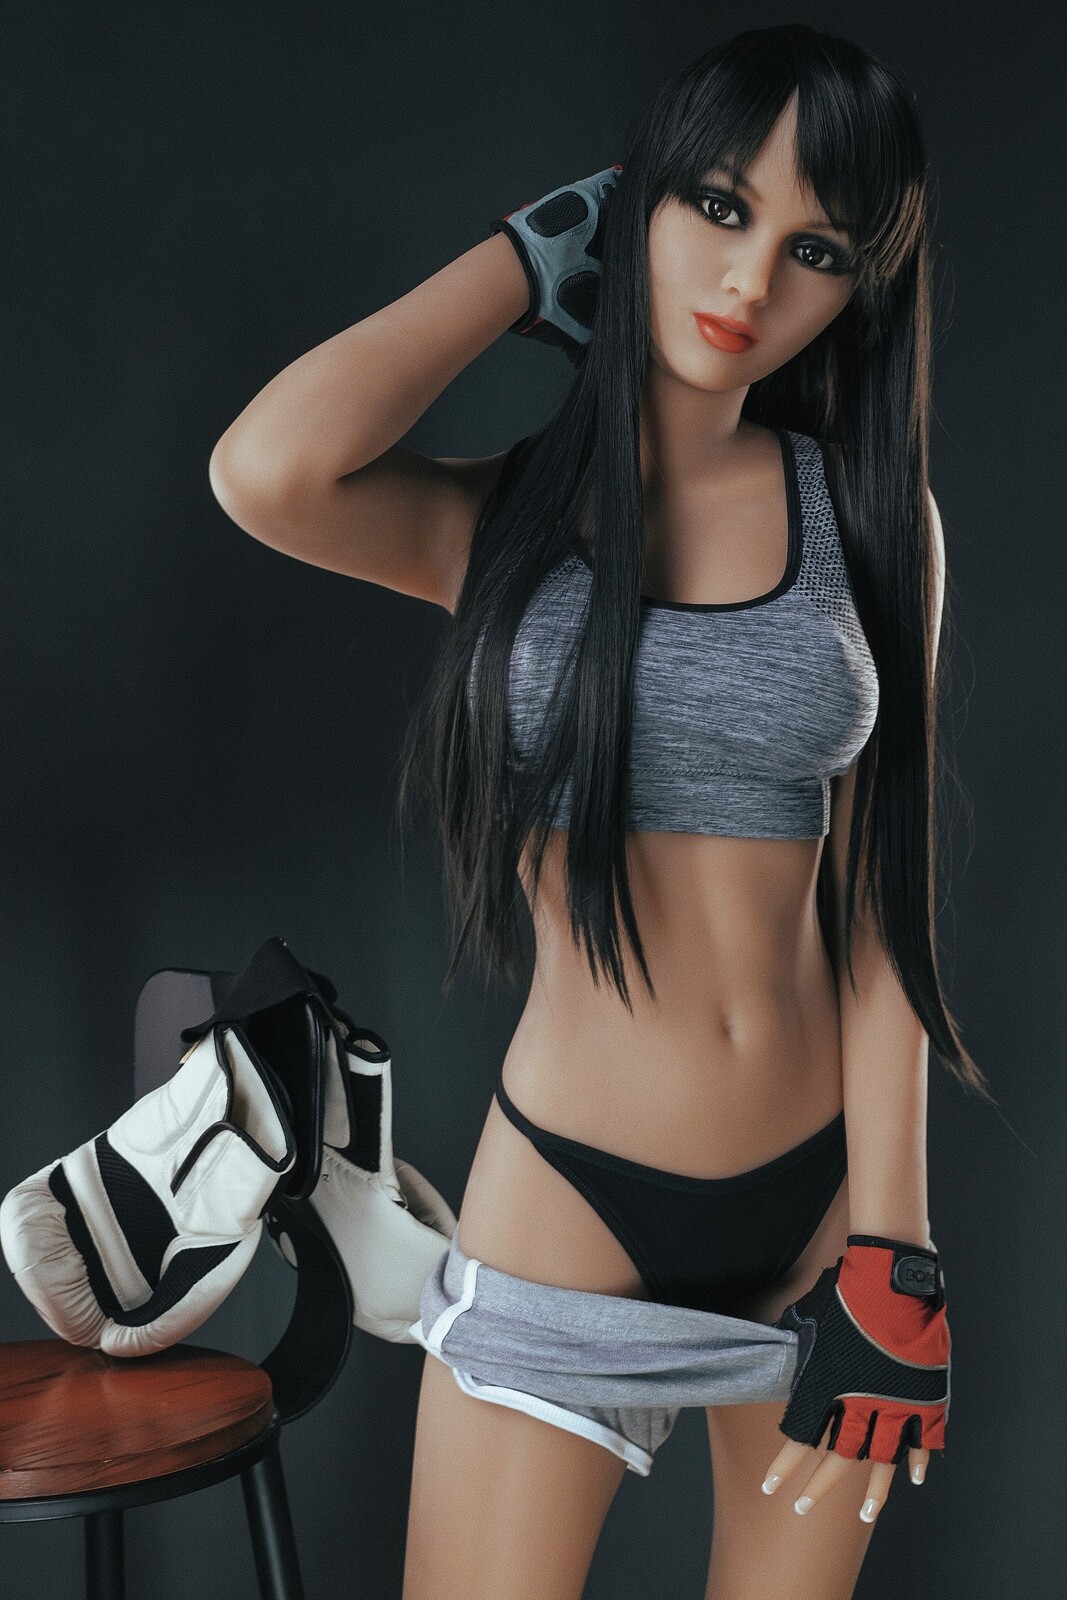 166cm C-Cup (5’4 ft) Athletic Real Sexdoll with the Right Curves